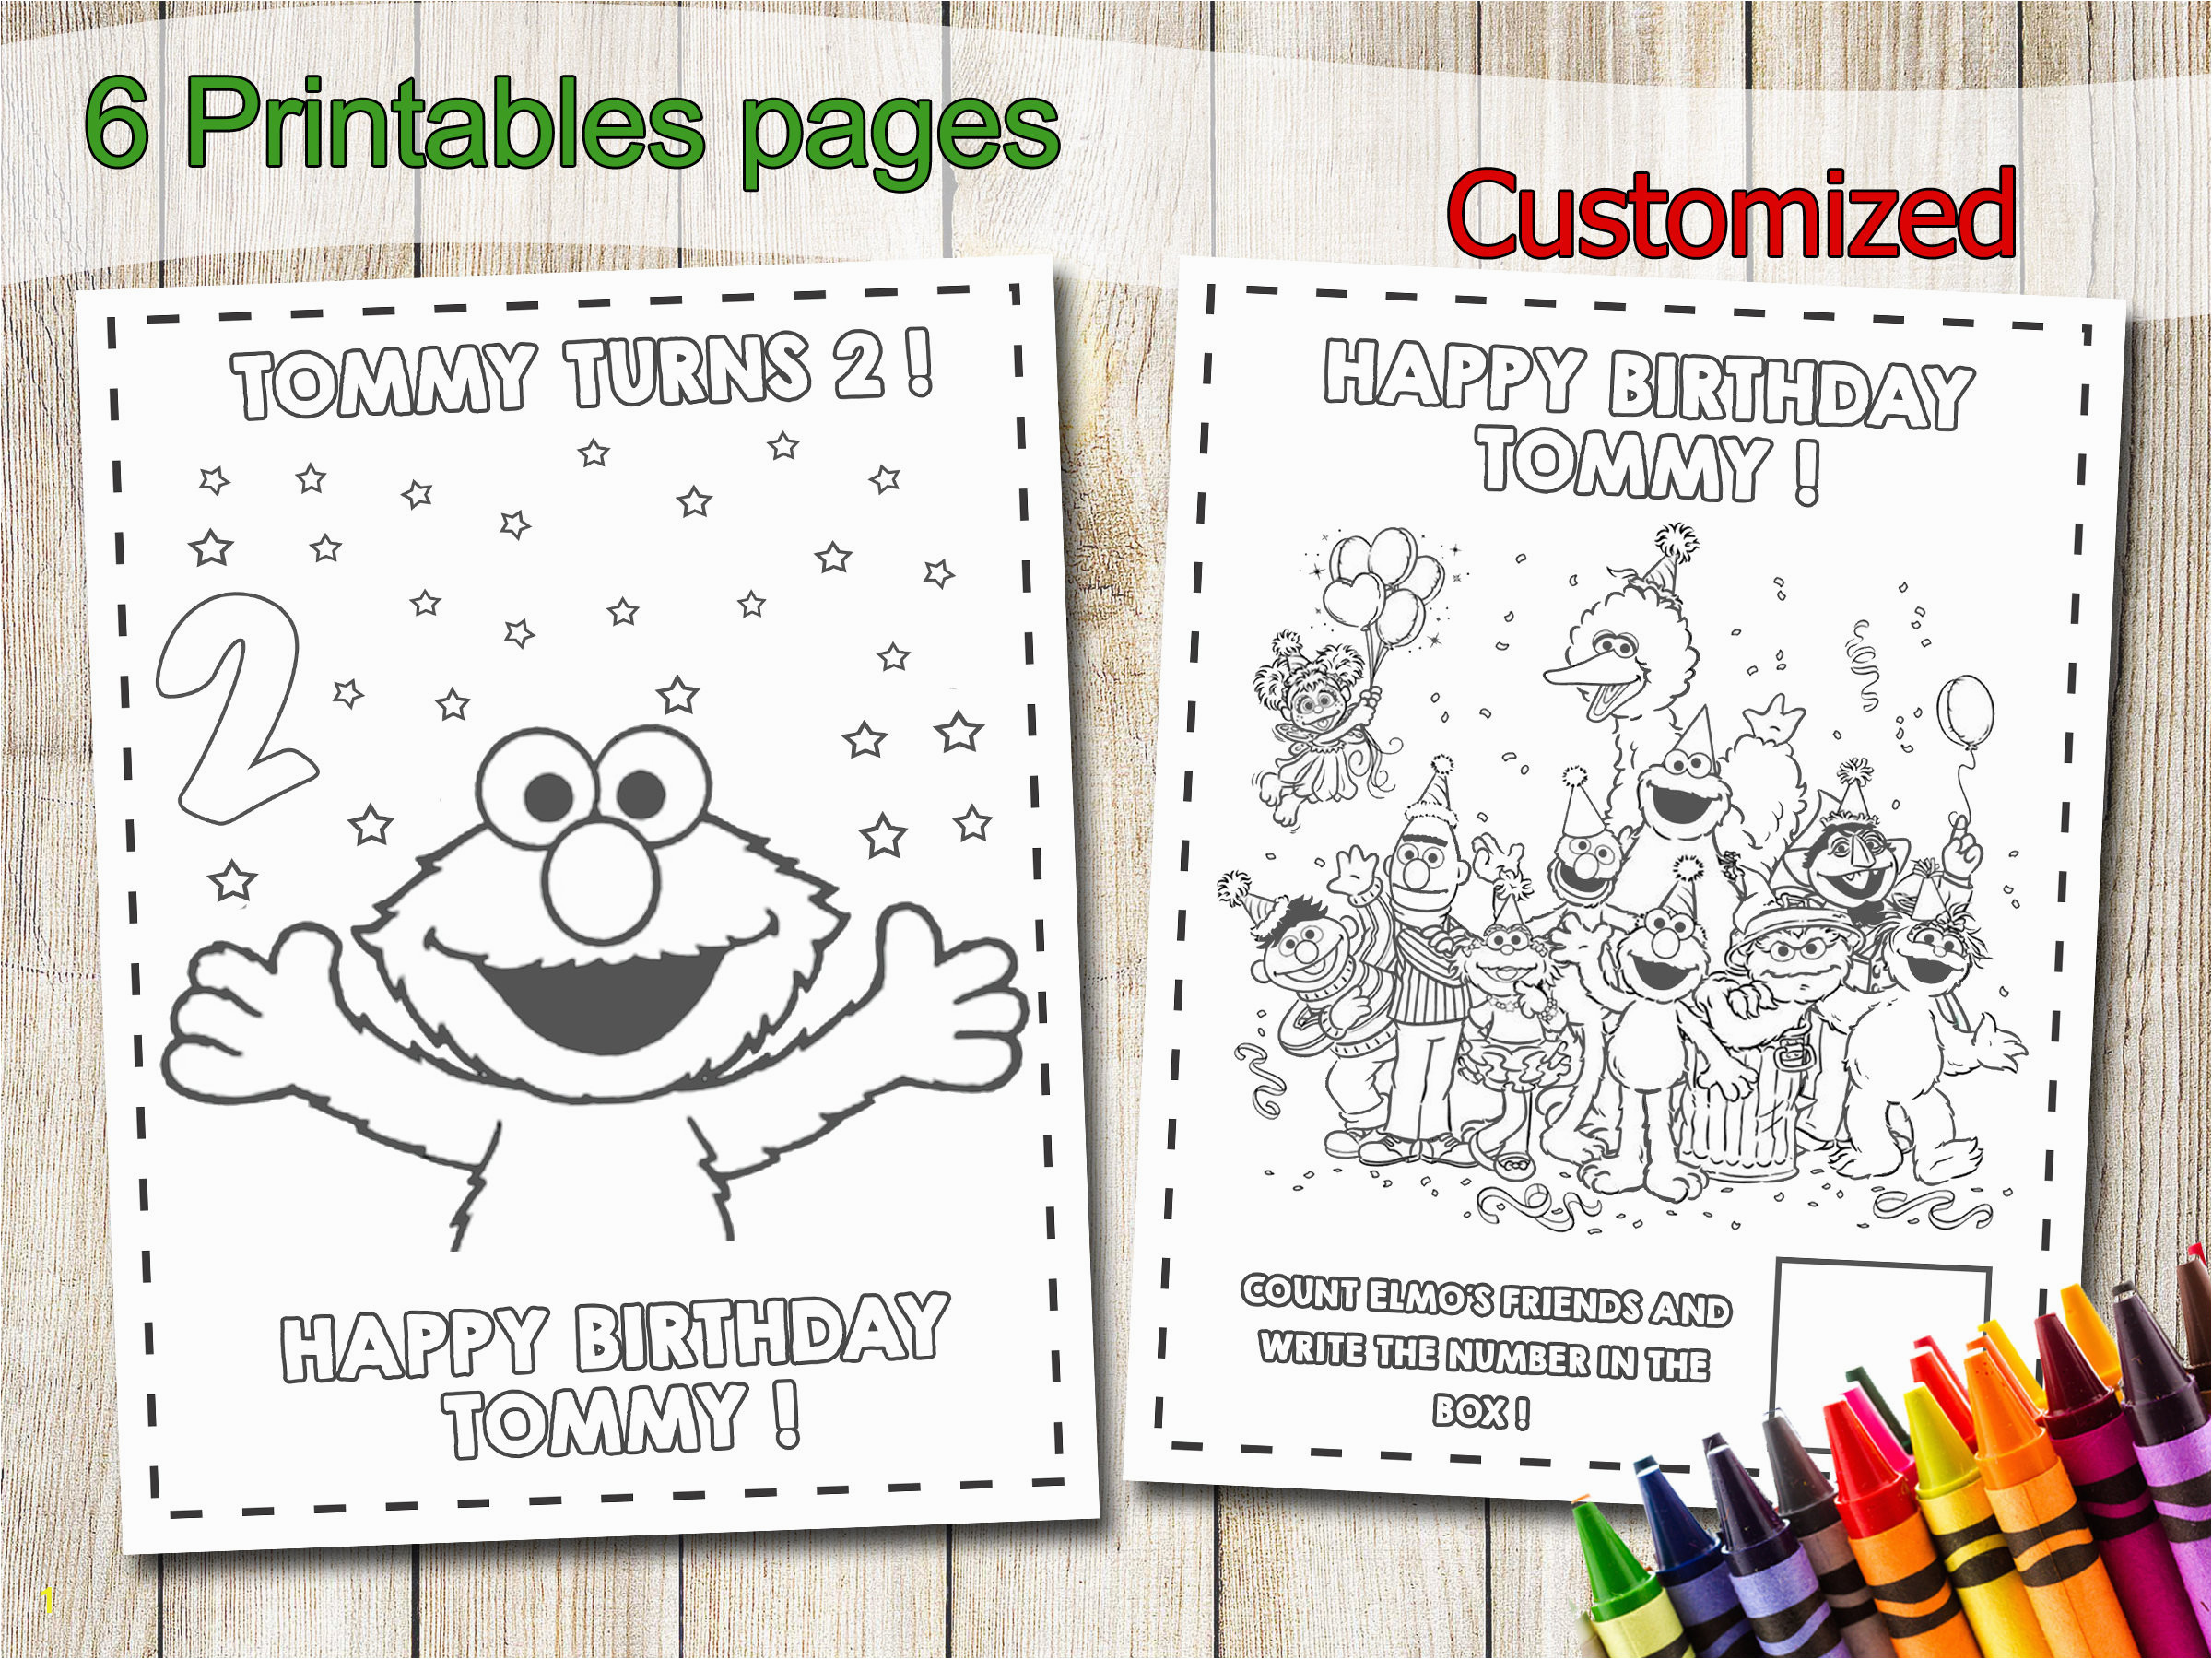 Birthday Party Coloring Pages for Kids Elmo Coloring Pages Elmo Party Favors Elmo Birthday Party Favor Elmo Coloring Book Elmo Activities